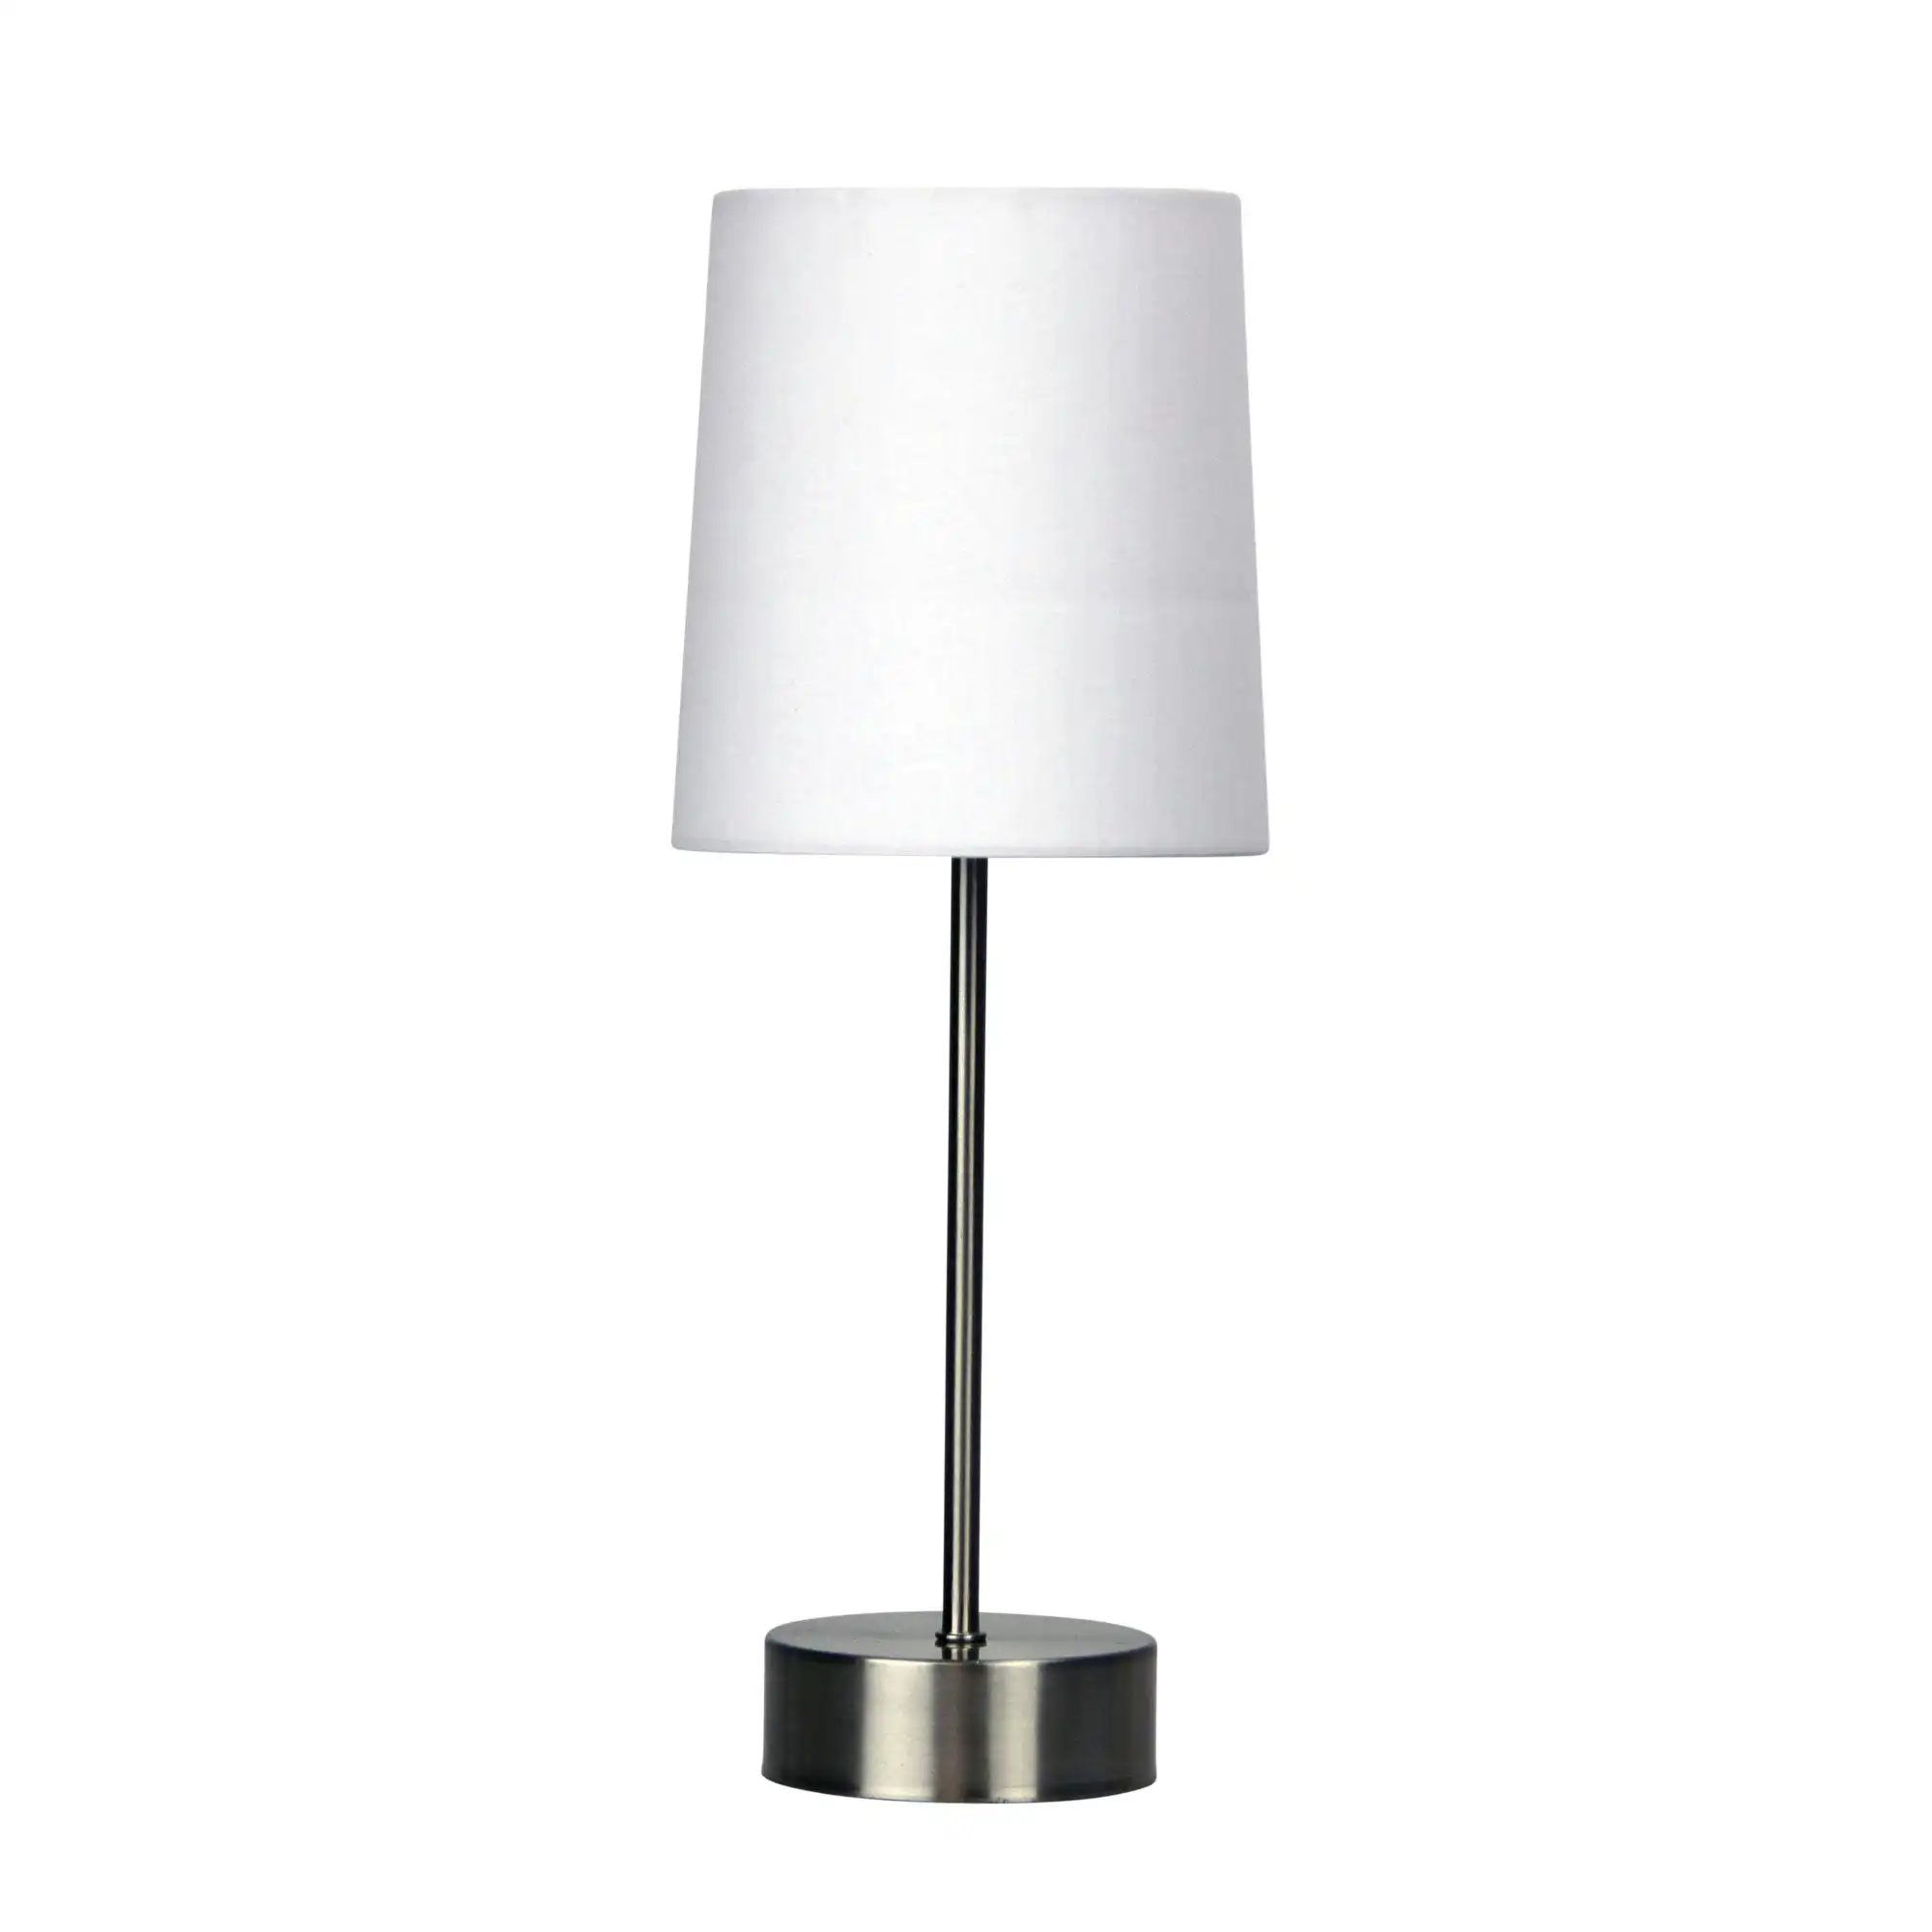 Lancet ON-OFF Touch Lamp White Shade